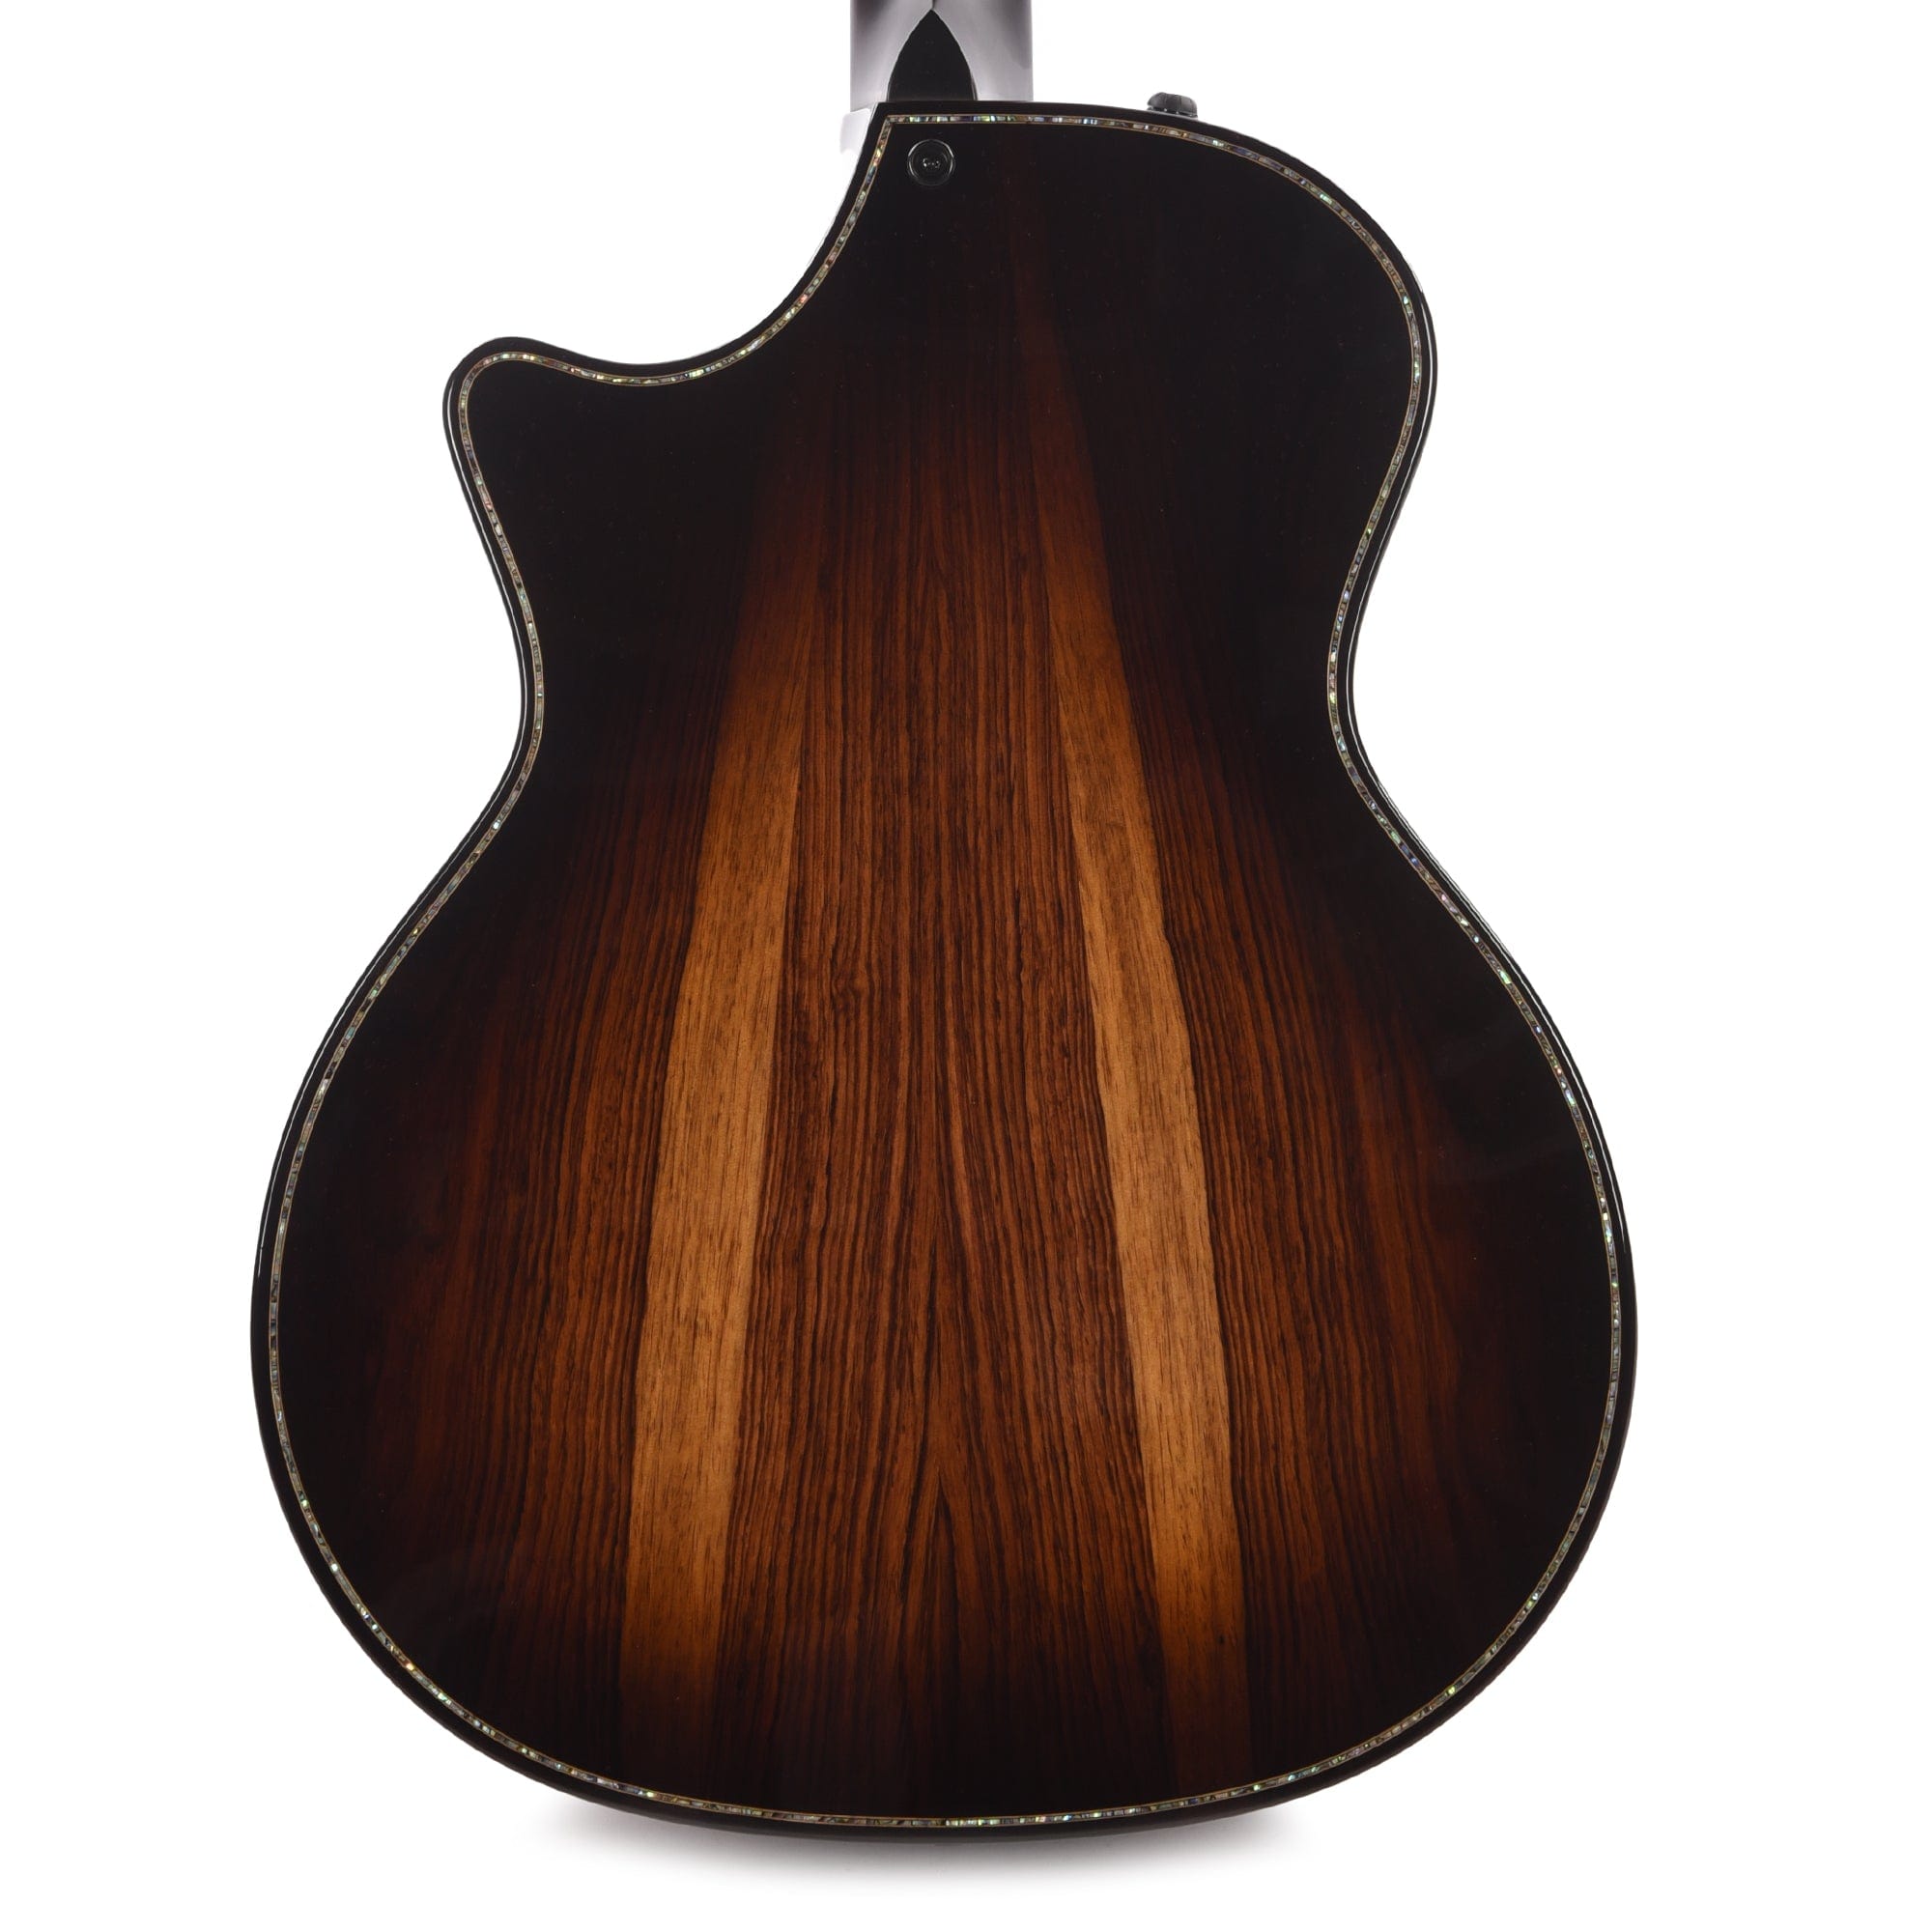 Taylor Builder's Edition 914ce Grand Auditorium Stripy Sinker Redwood/Rosewood Natural Top Acoustic Guitars / OM and Auditorium